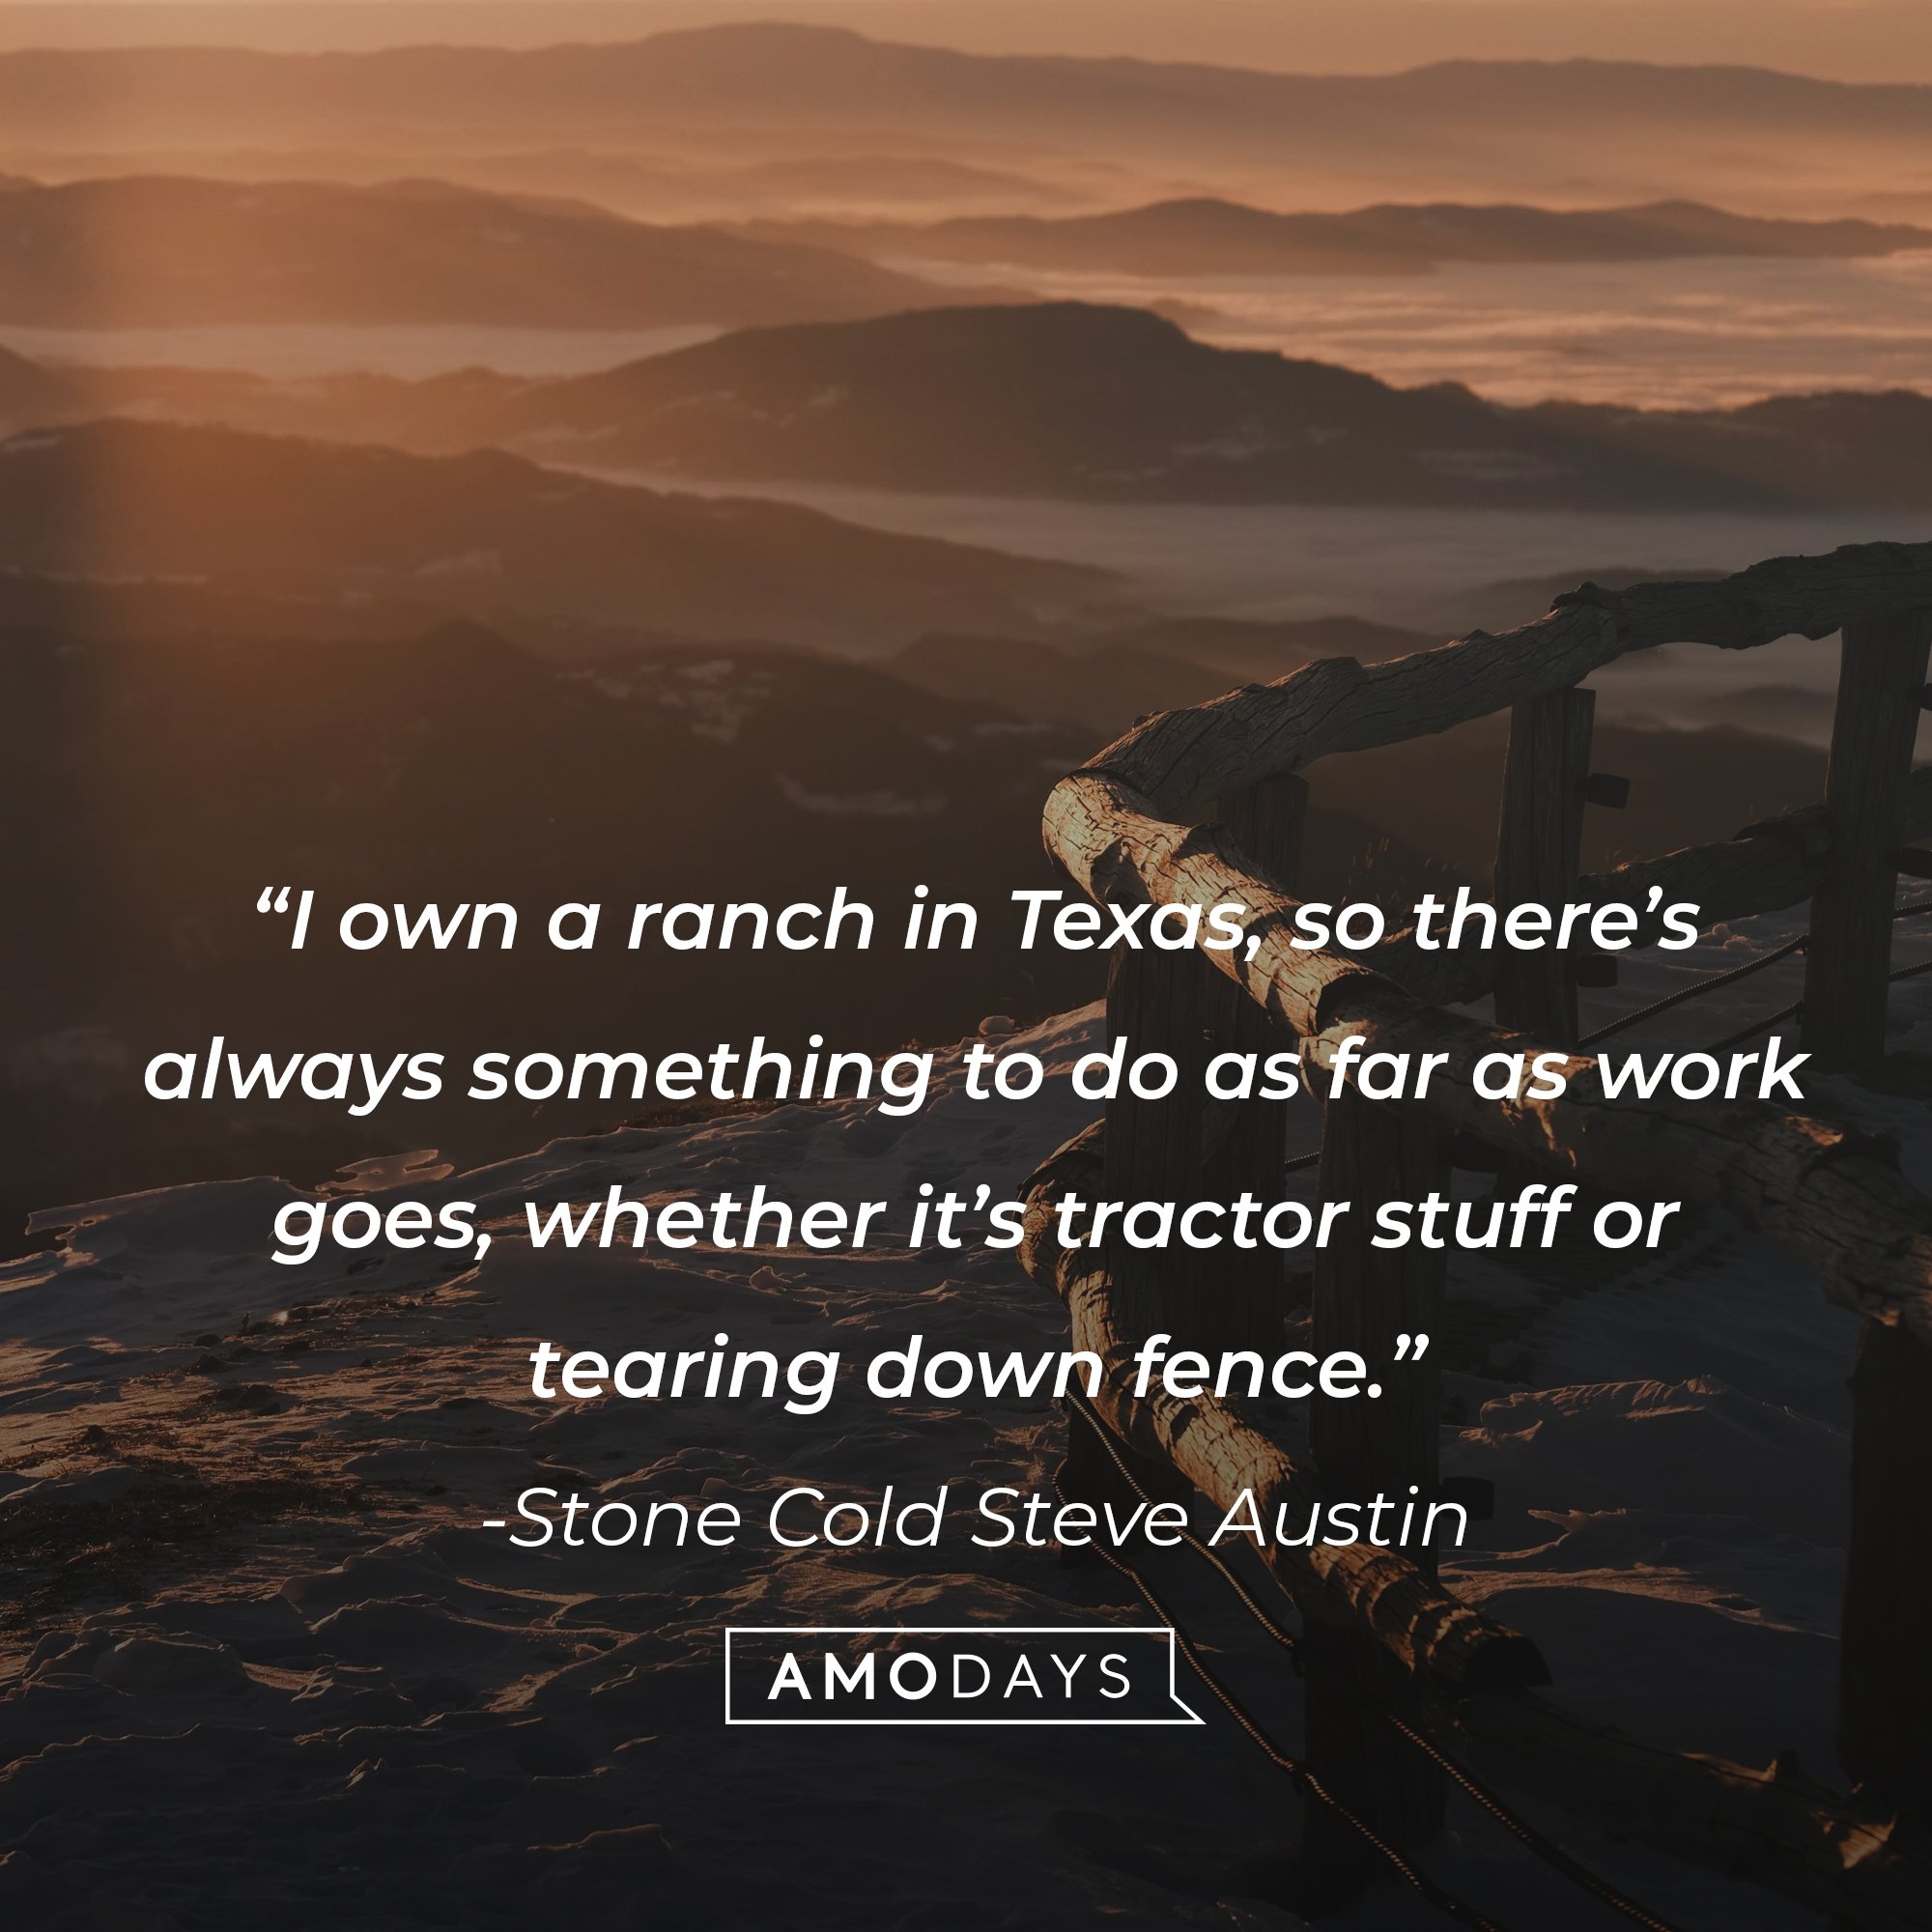 Stone Cold Steve Austin's quote: “I own a ranch in Texas, so there’s always something to do as far as work goes, whether it’s tractor stuff or tearing down fence.” | Image: AmoDays